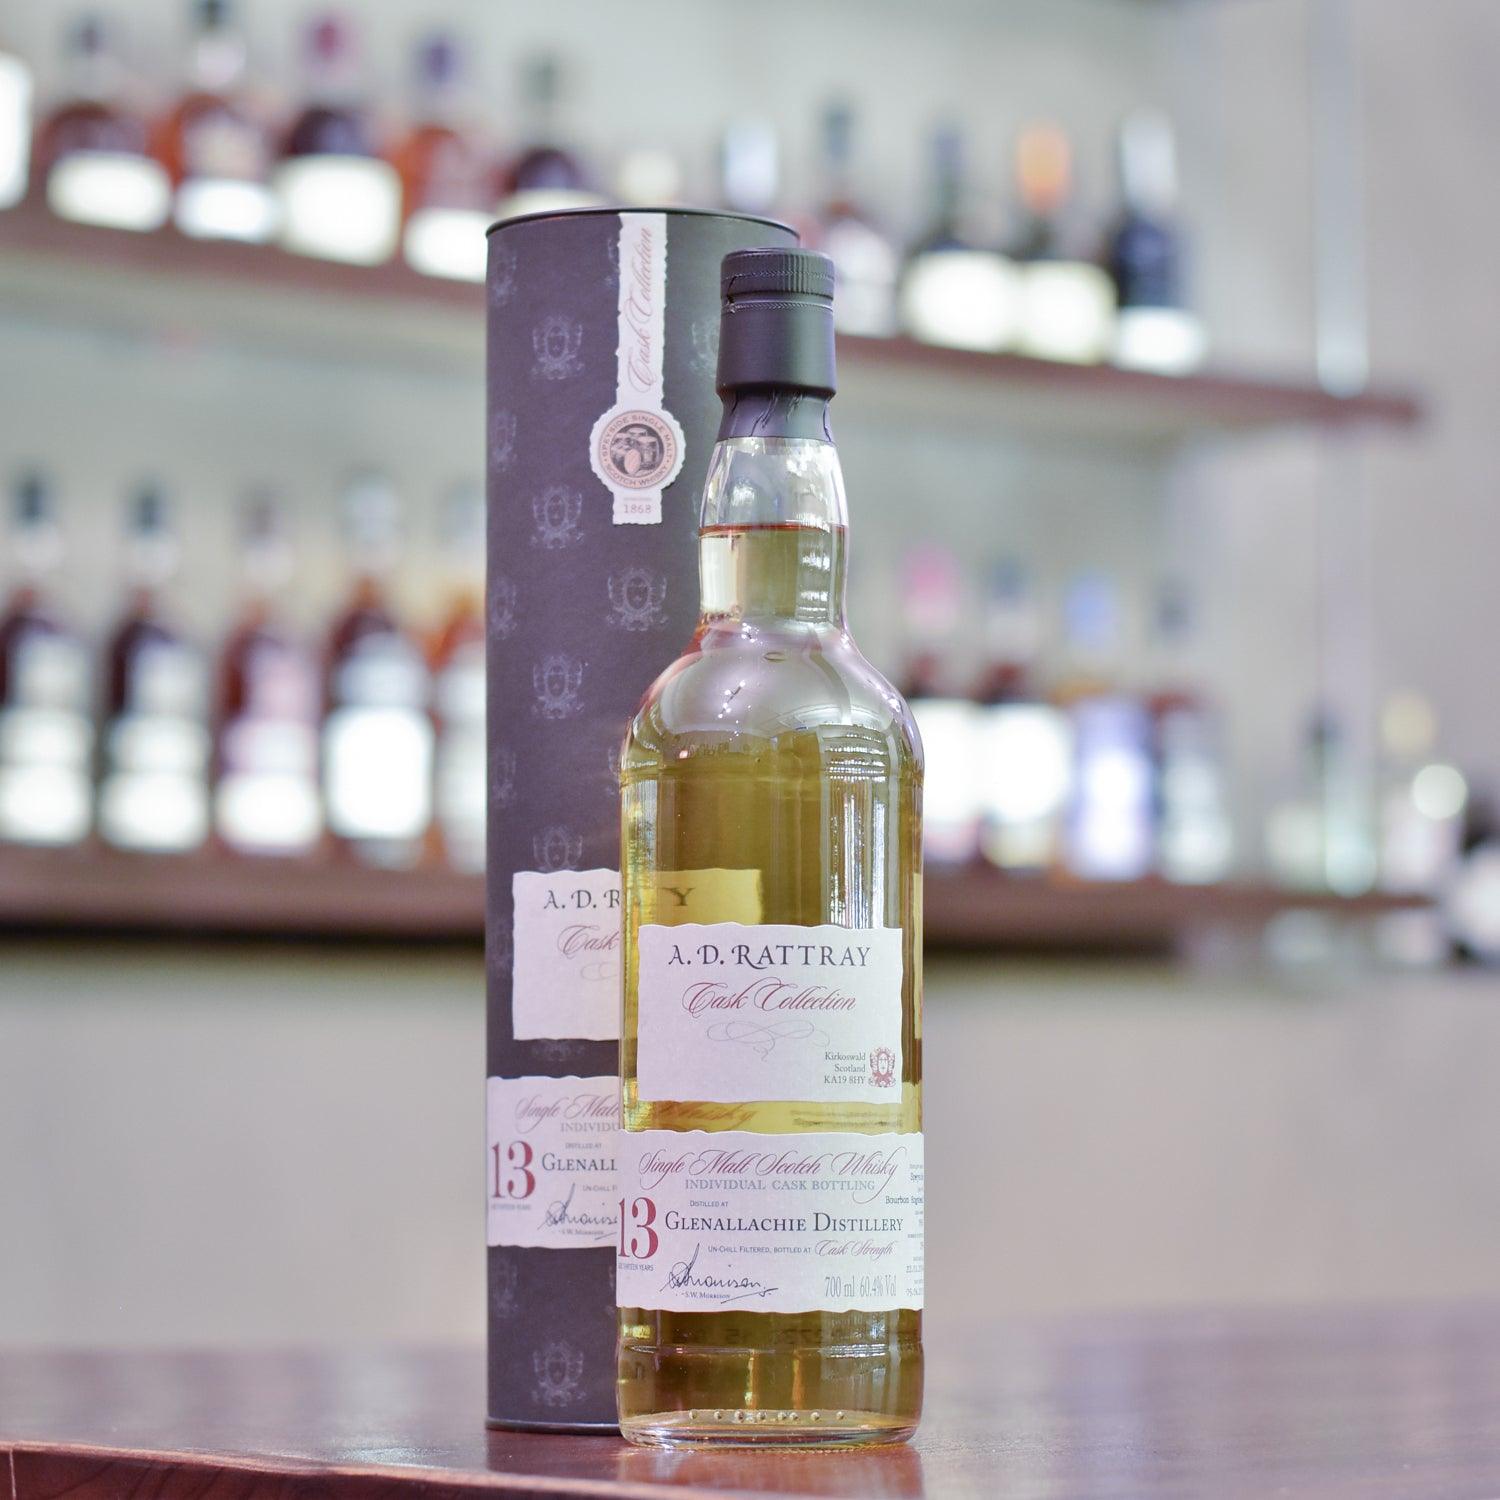 A.D. Rattray - Glenallachie 13 Year Old 2004 Cask 3560 - The Rare Malt